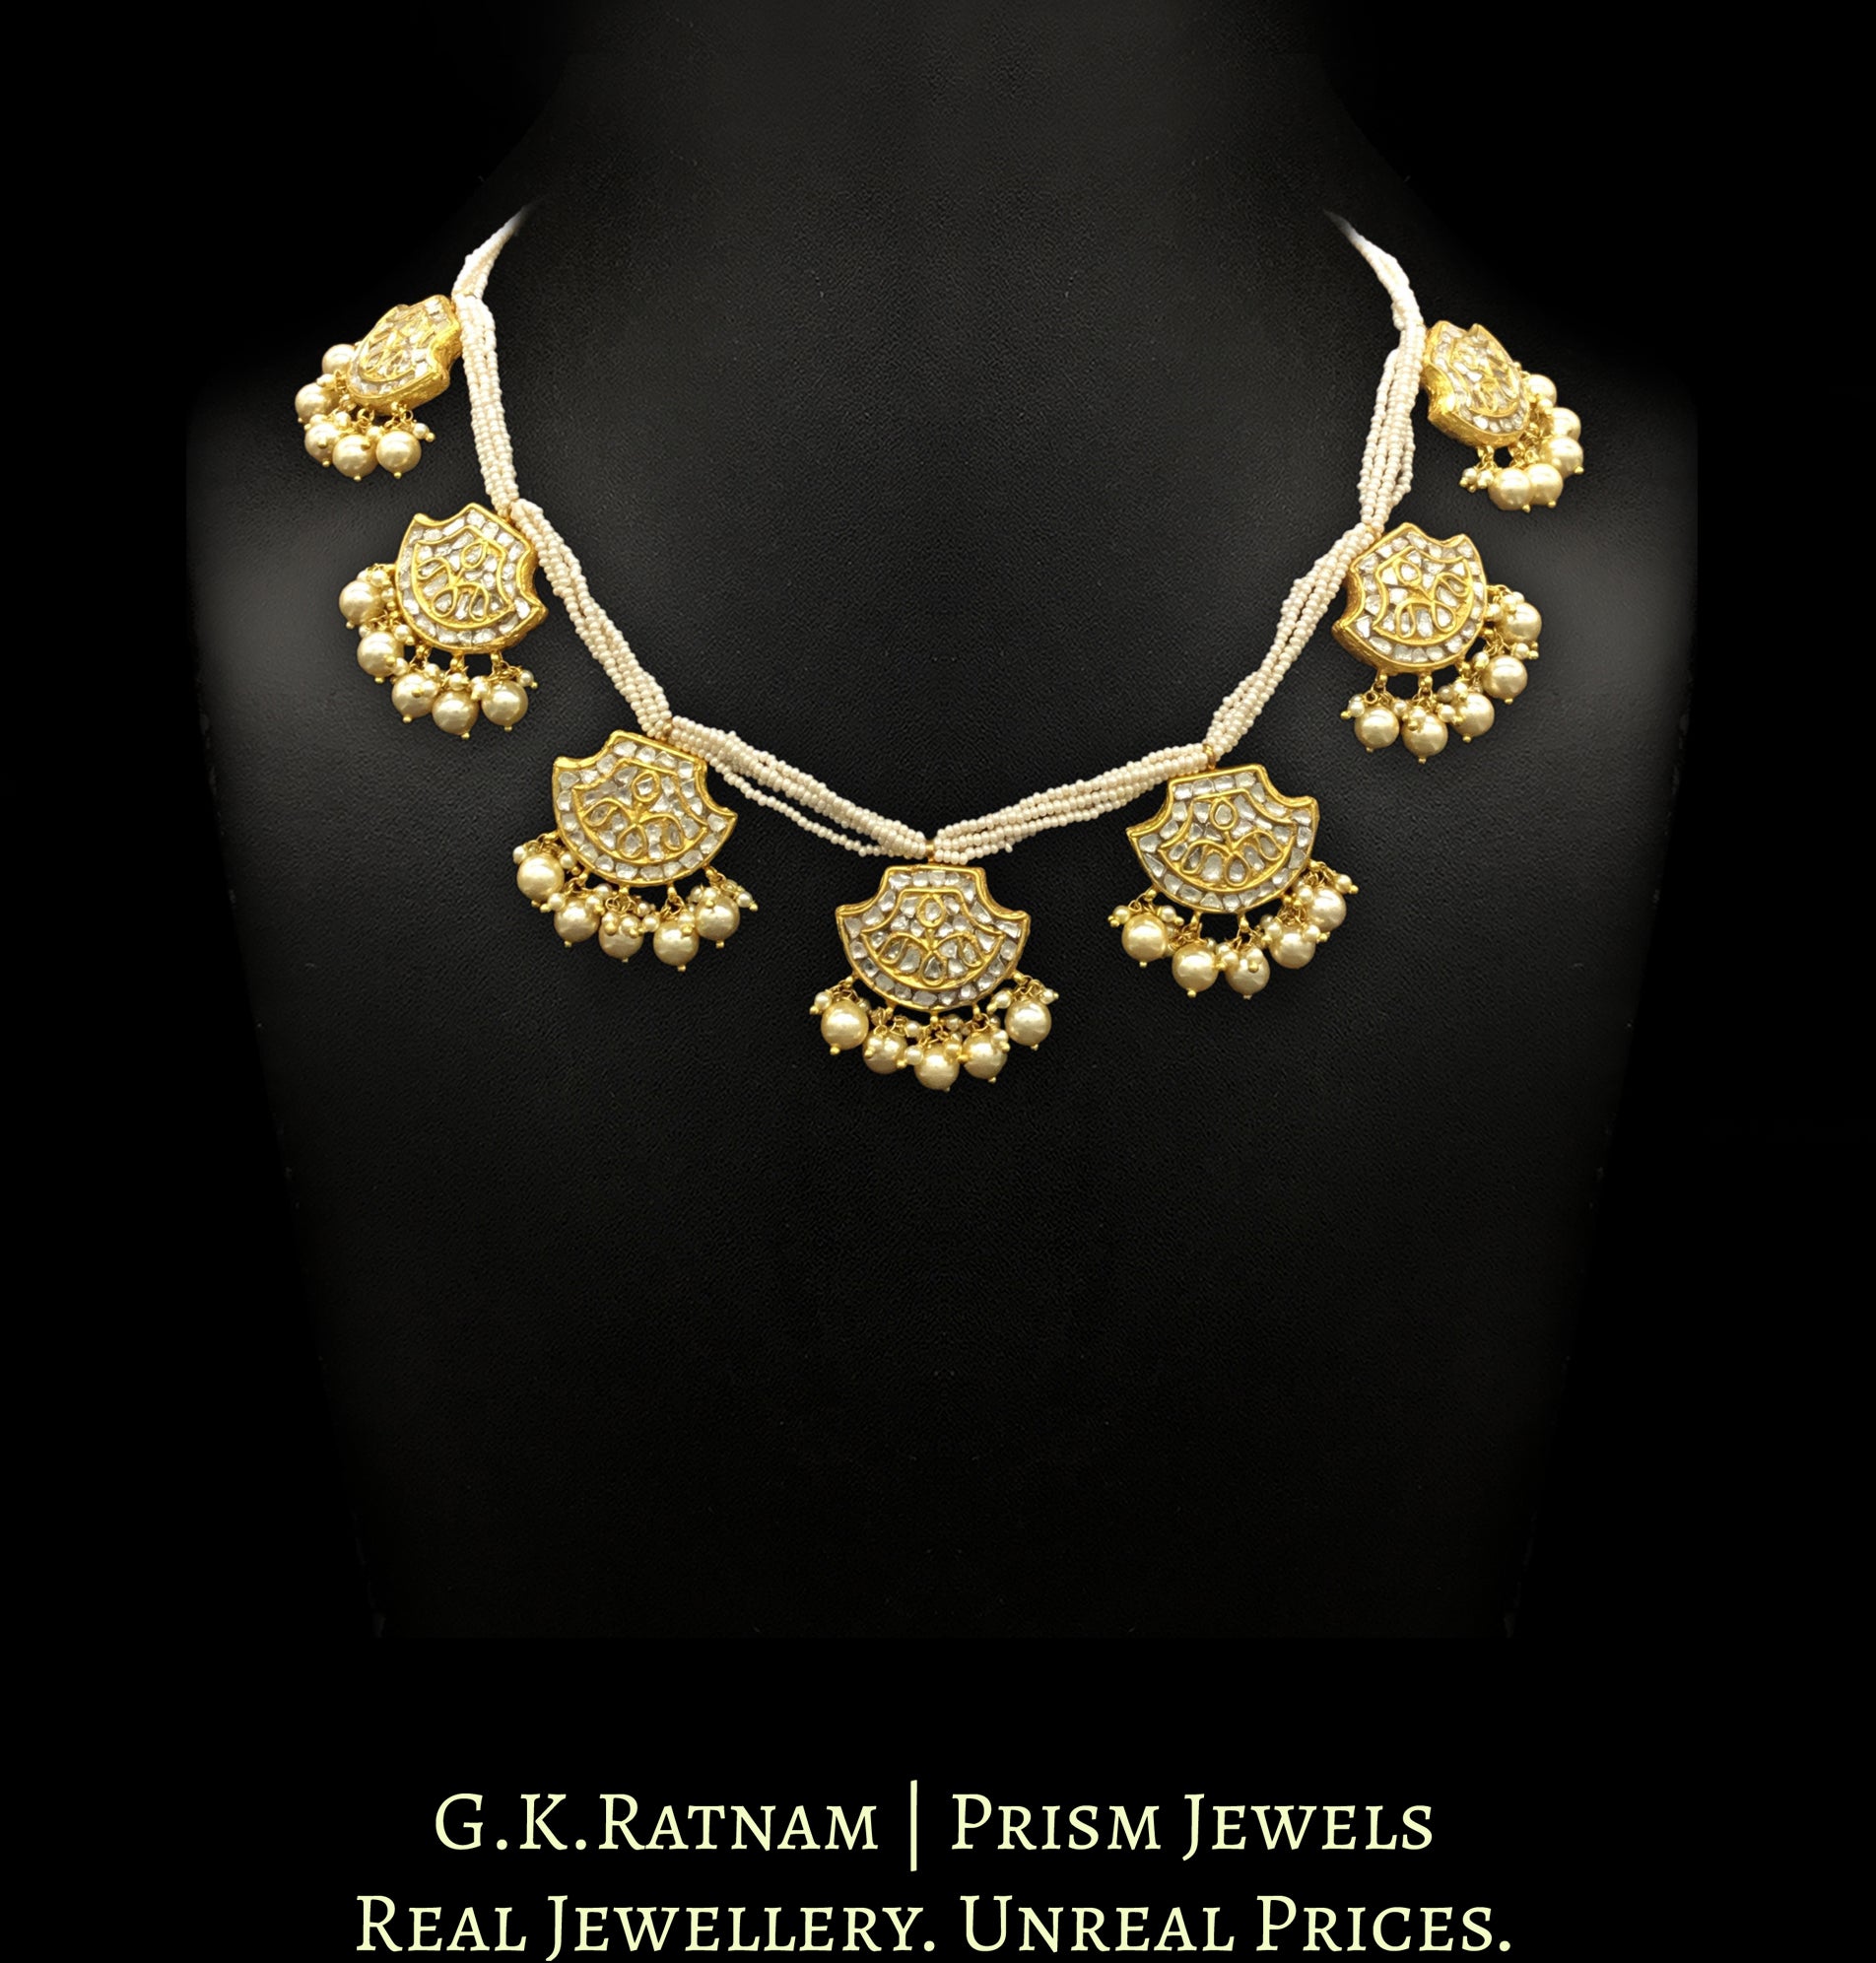 23k Gold and Diamond Polki Pankhi (fan) Necklace with Chid Pearl bunches - G. K. Ratnam